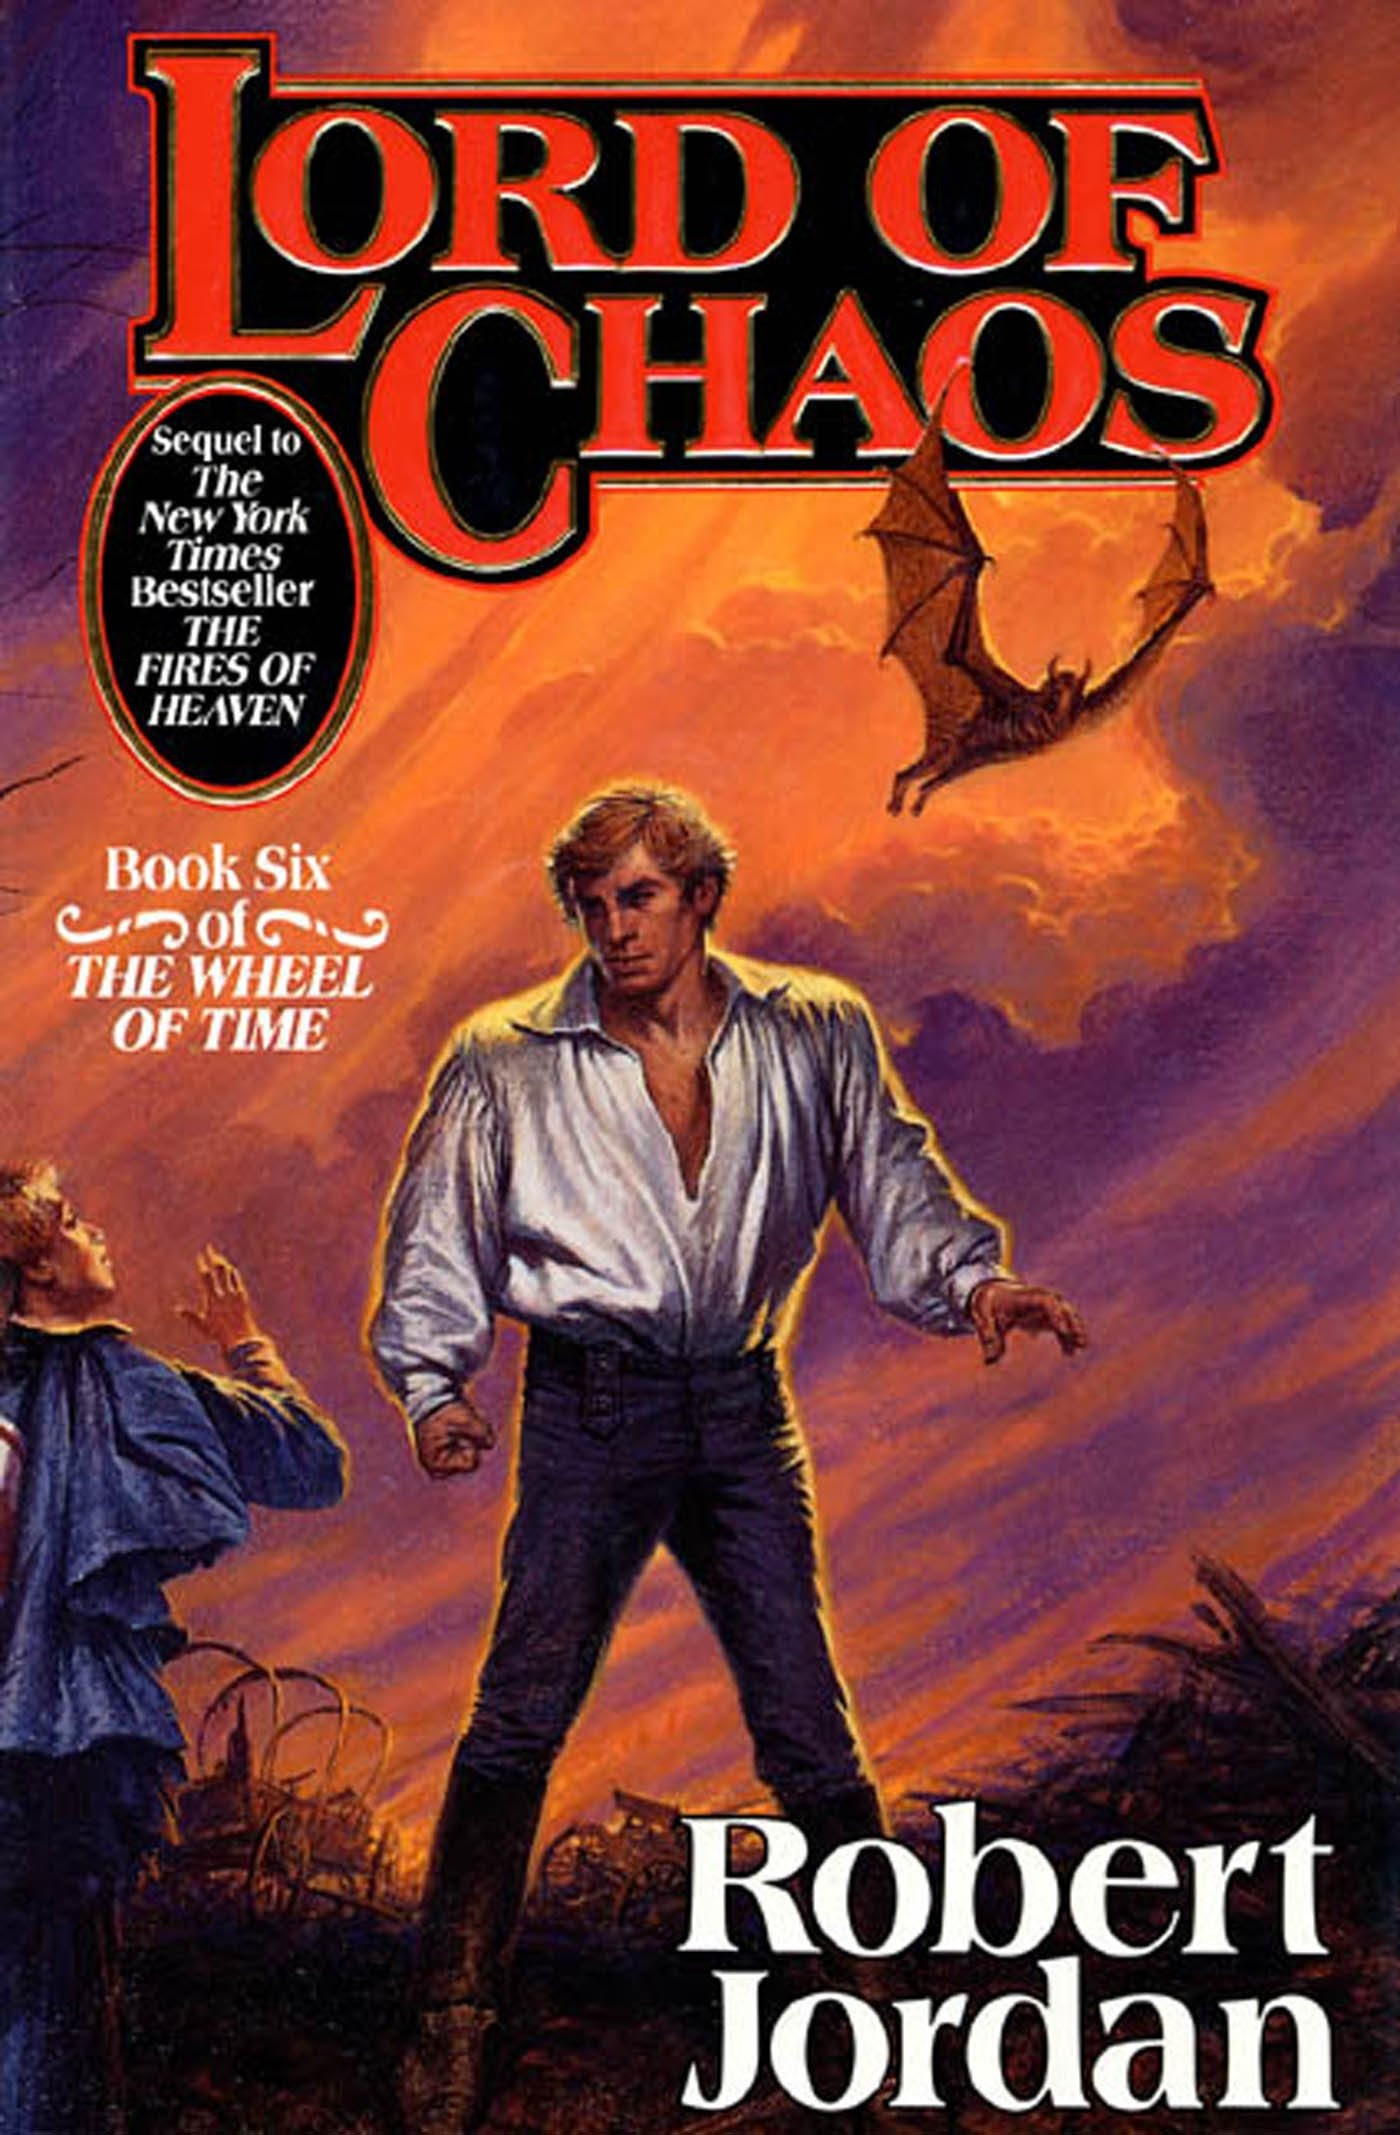 Lord of Chaos (Wheel of Time, #6) PDF